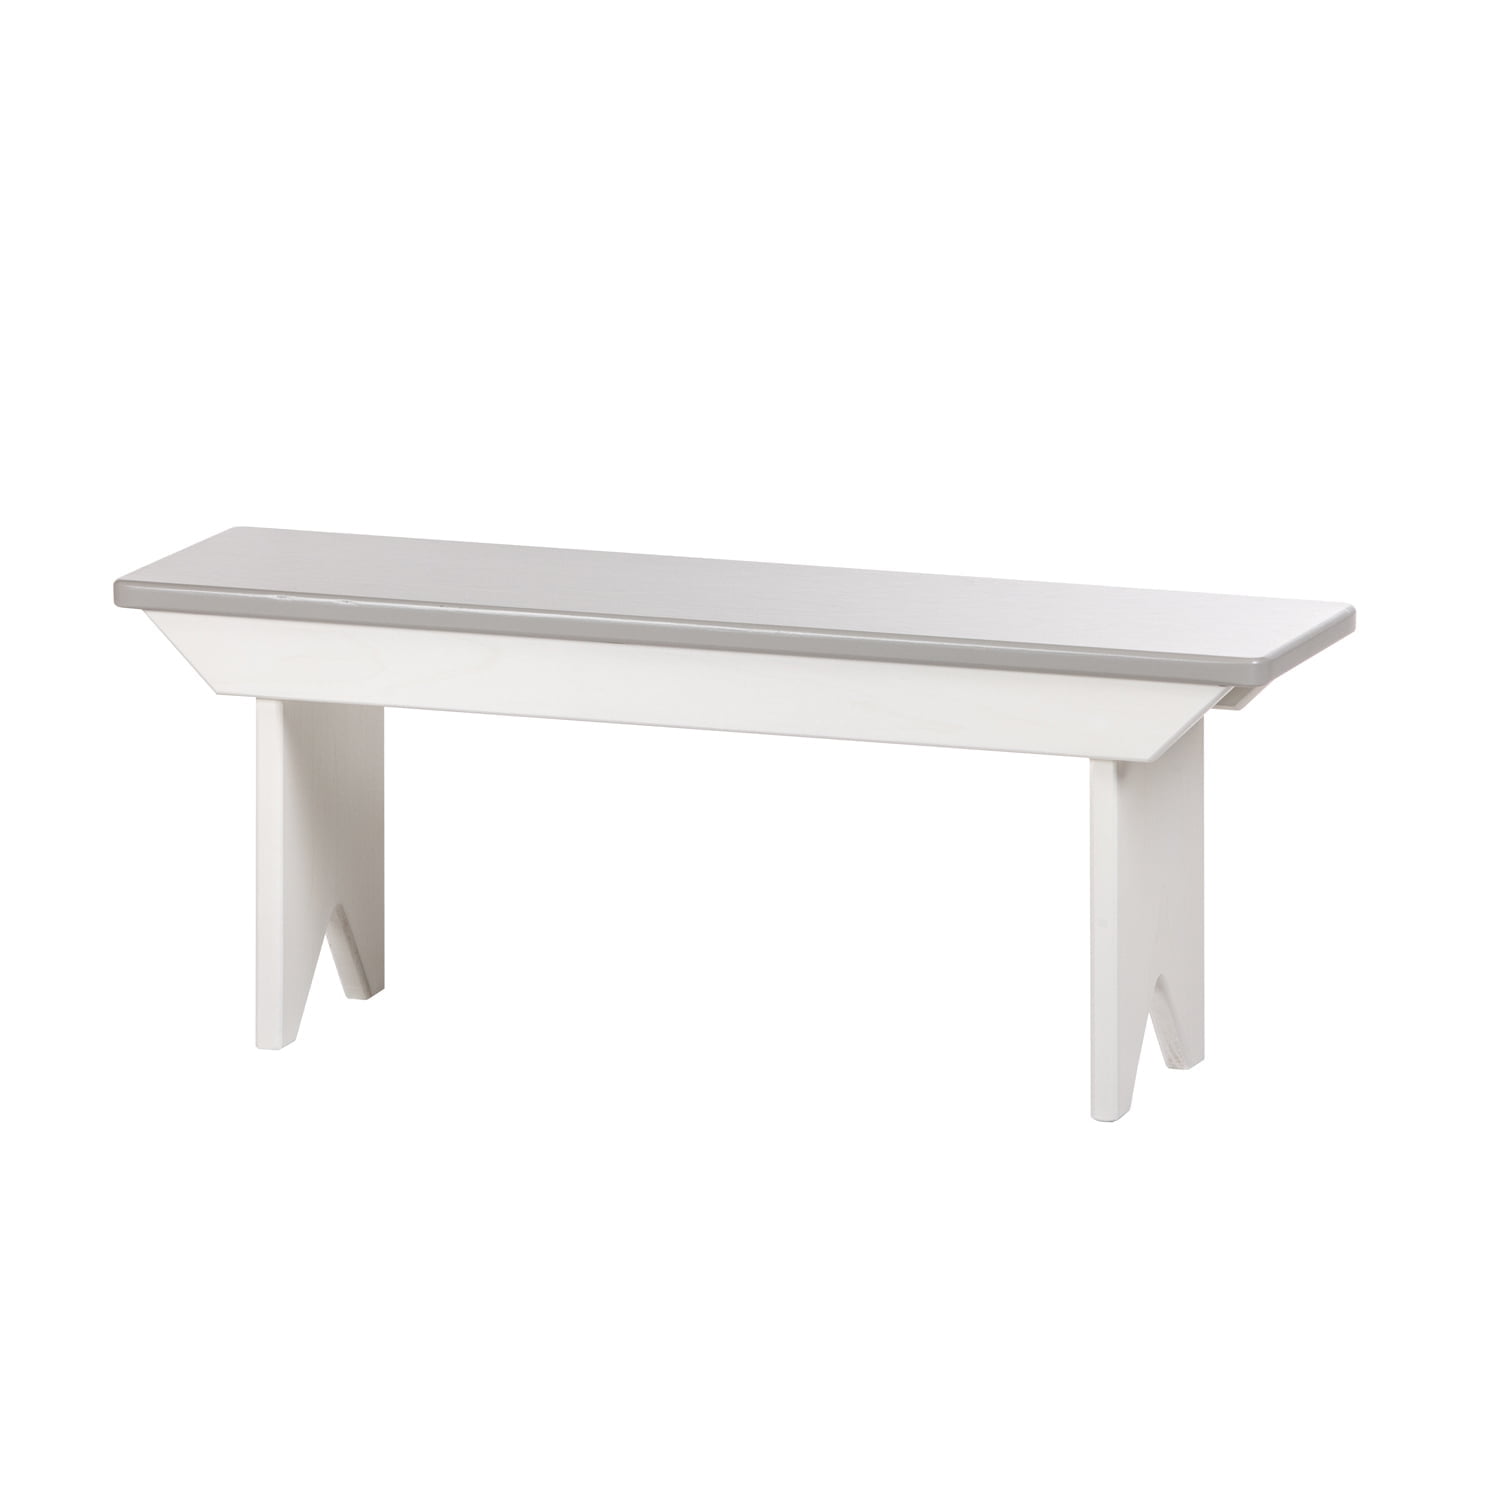 Child's Real Wood Bench - White / Grey